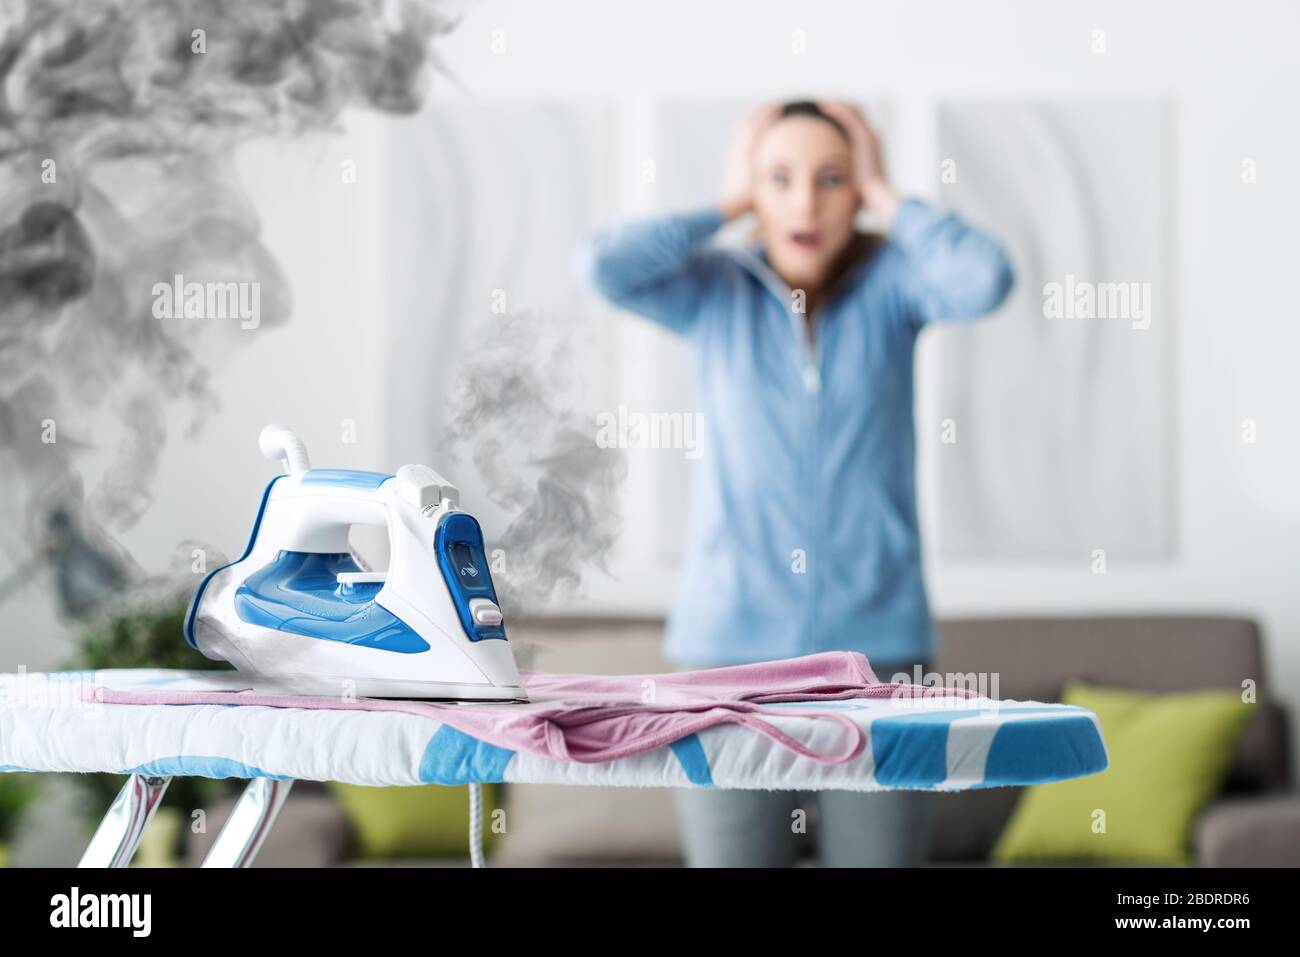 Shocked woman gasping at home, she has left the iron on and she is burning her clothes Stock Photo